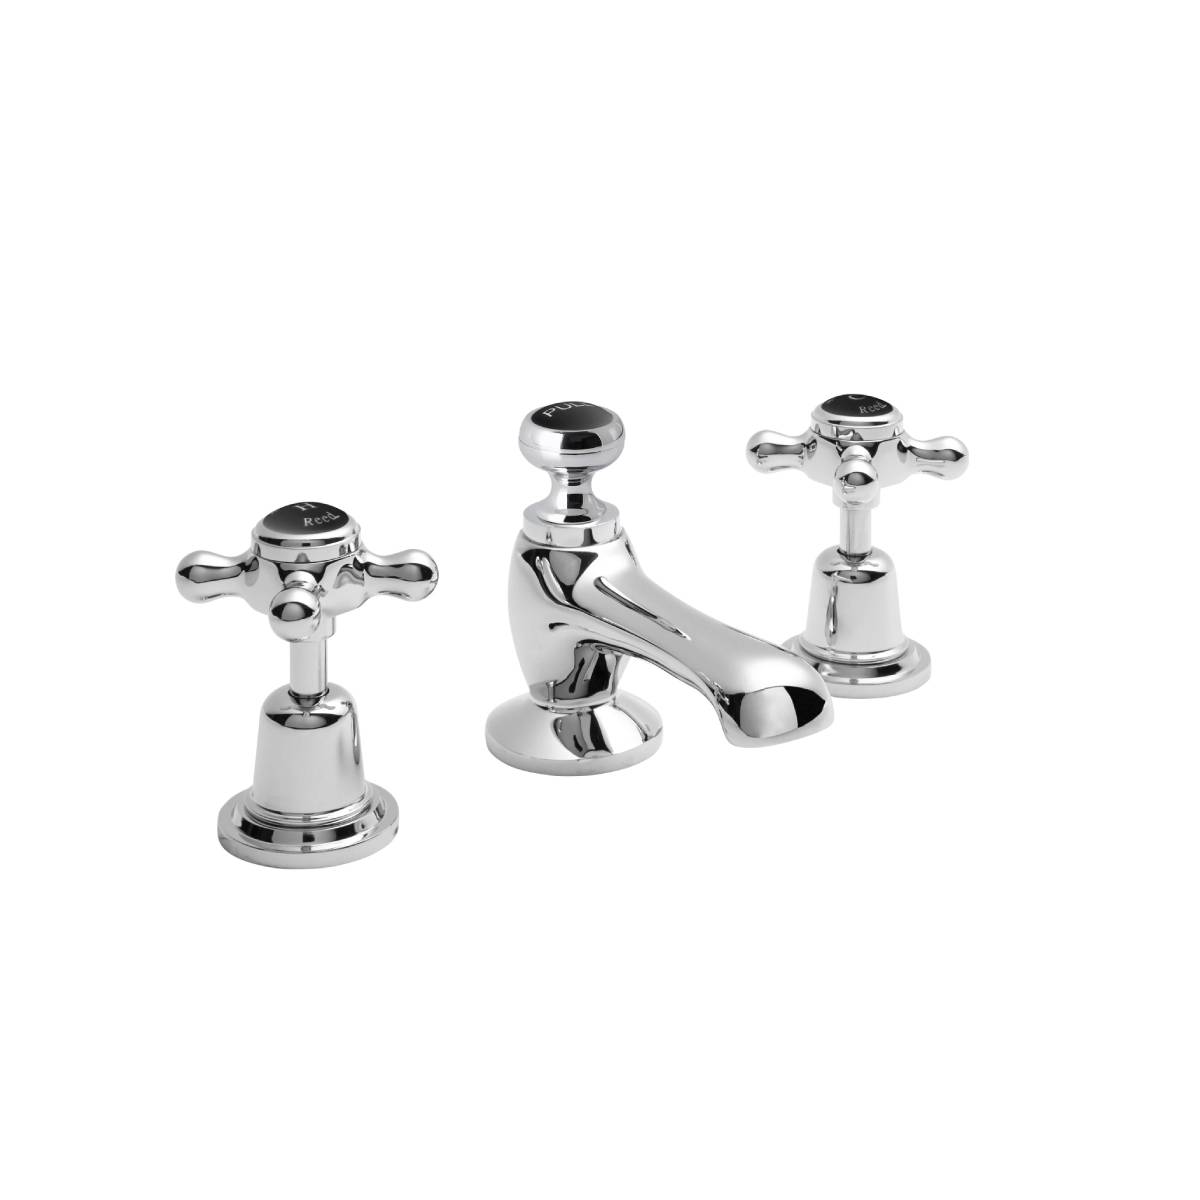 Hudson Reed Topaz with Crosshead 3 Tap Hole Basin Mixer & Domed Collar - Black BC407DX (2416)